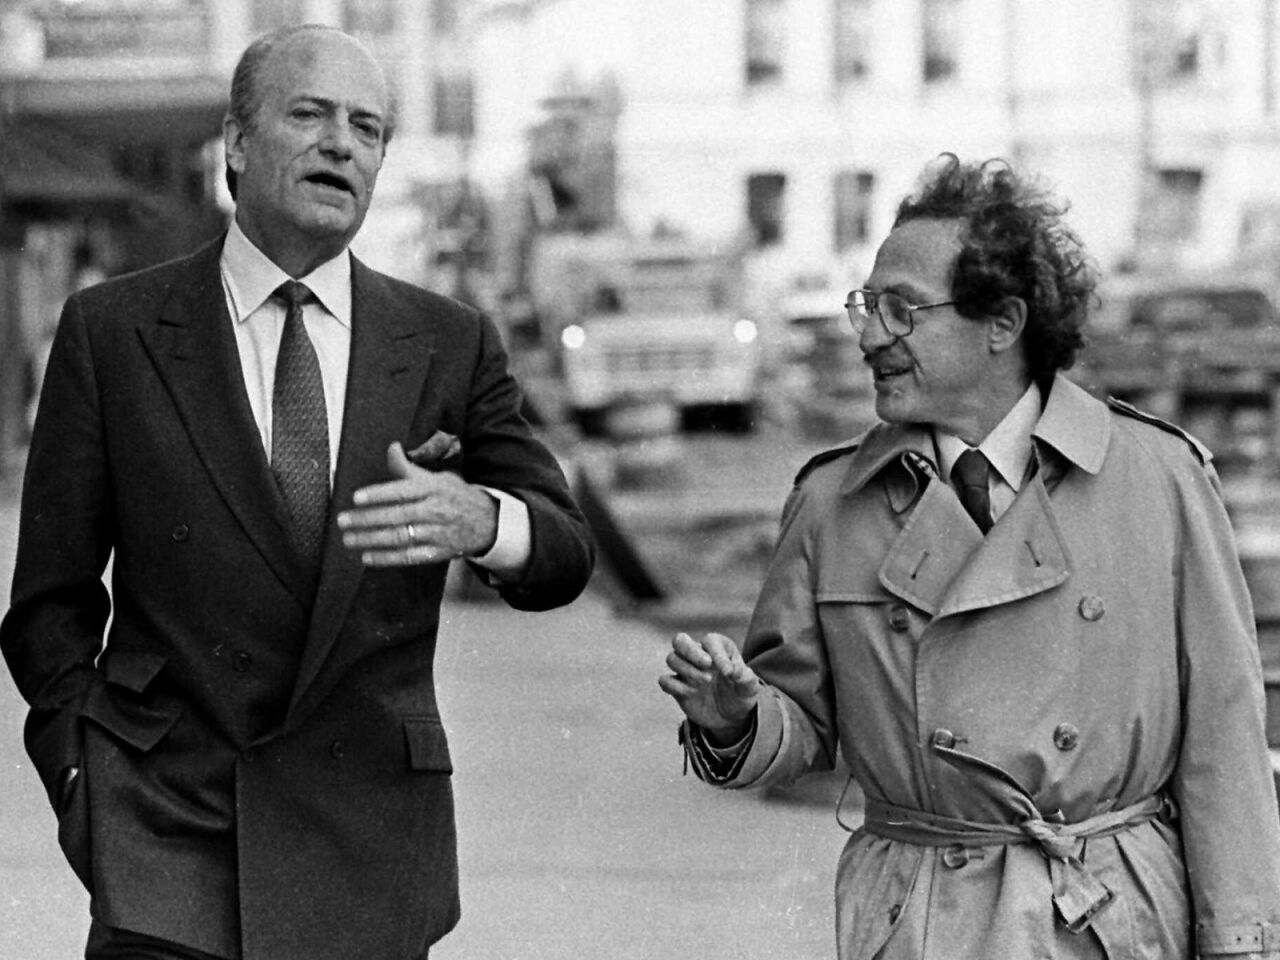 Danish-born socialite Claus von Bulow, left, shown with attorney Alan Dershowitz in April 1985, was convicted in 1982 and then acquitted three years later on two counts of attempting to murder his American heiress wife, Sunny, with injections of insulin. The high-profile case has been called one of the most sensational courtroom dramas in modern U.S. history. He was 92.